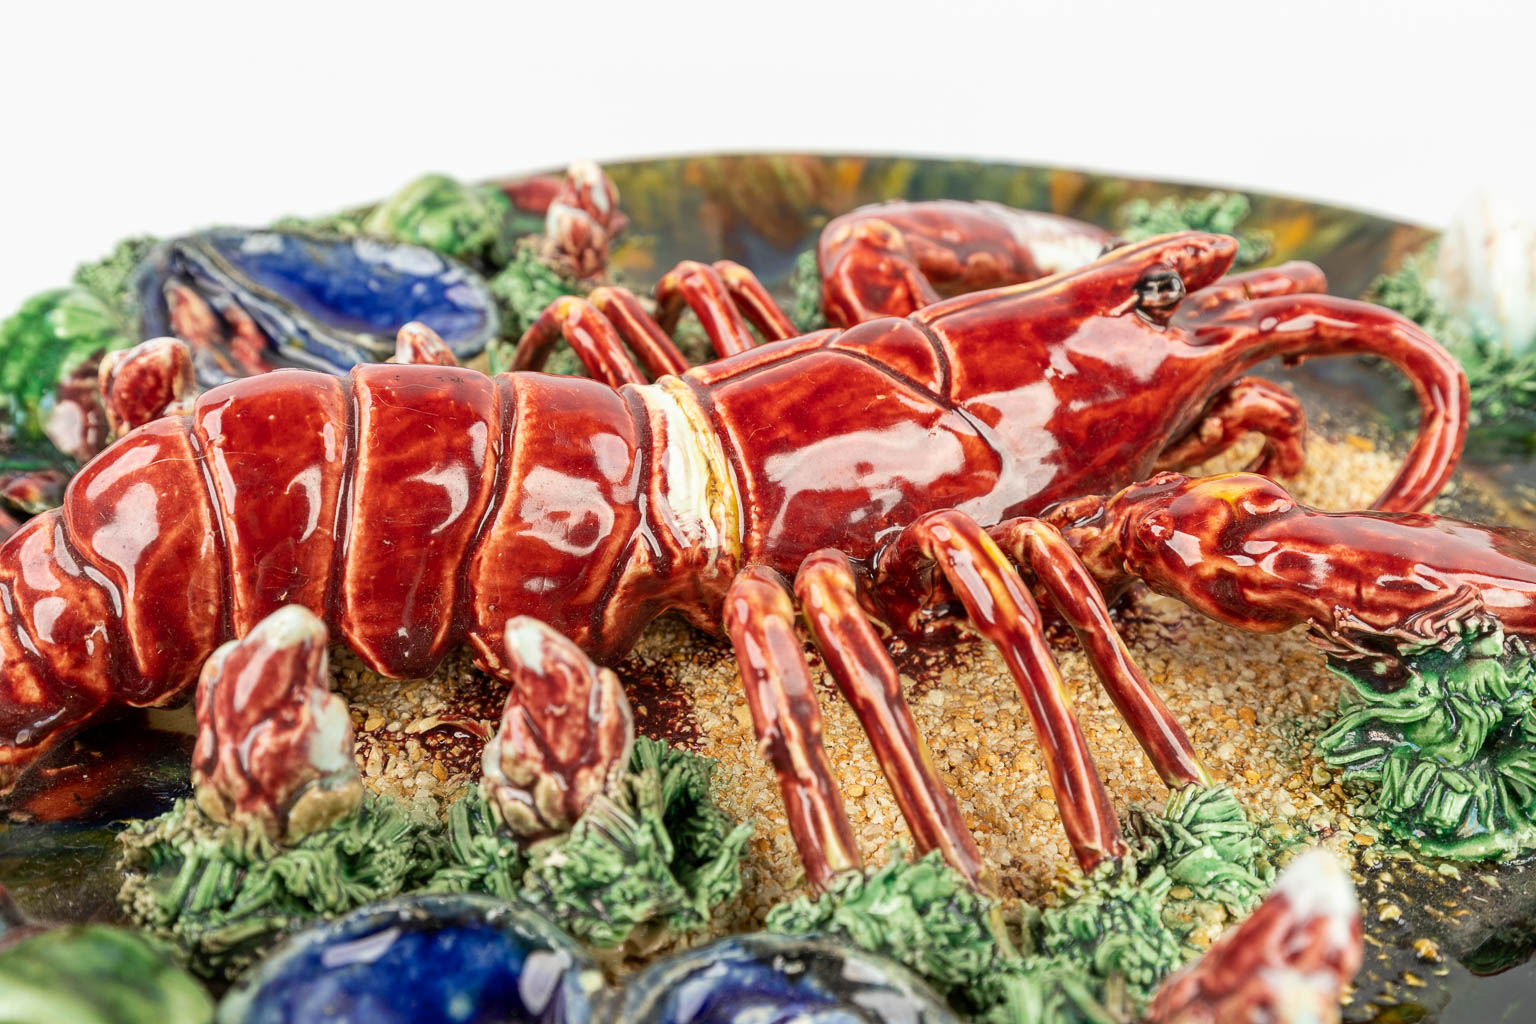 Jose Alvaro Caldas, a plate made of glazed faience, barbotine, decorated with a lobster. Suite de Palissy. 